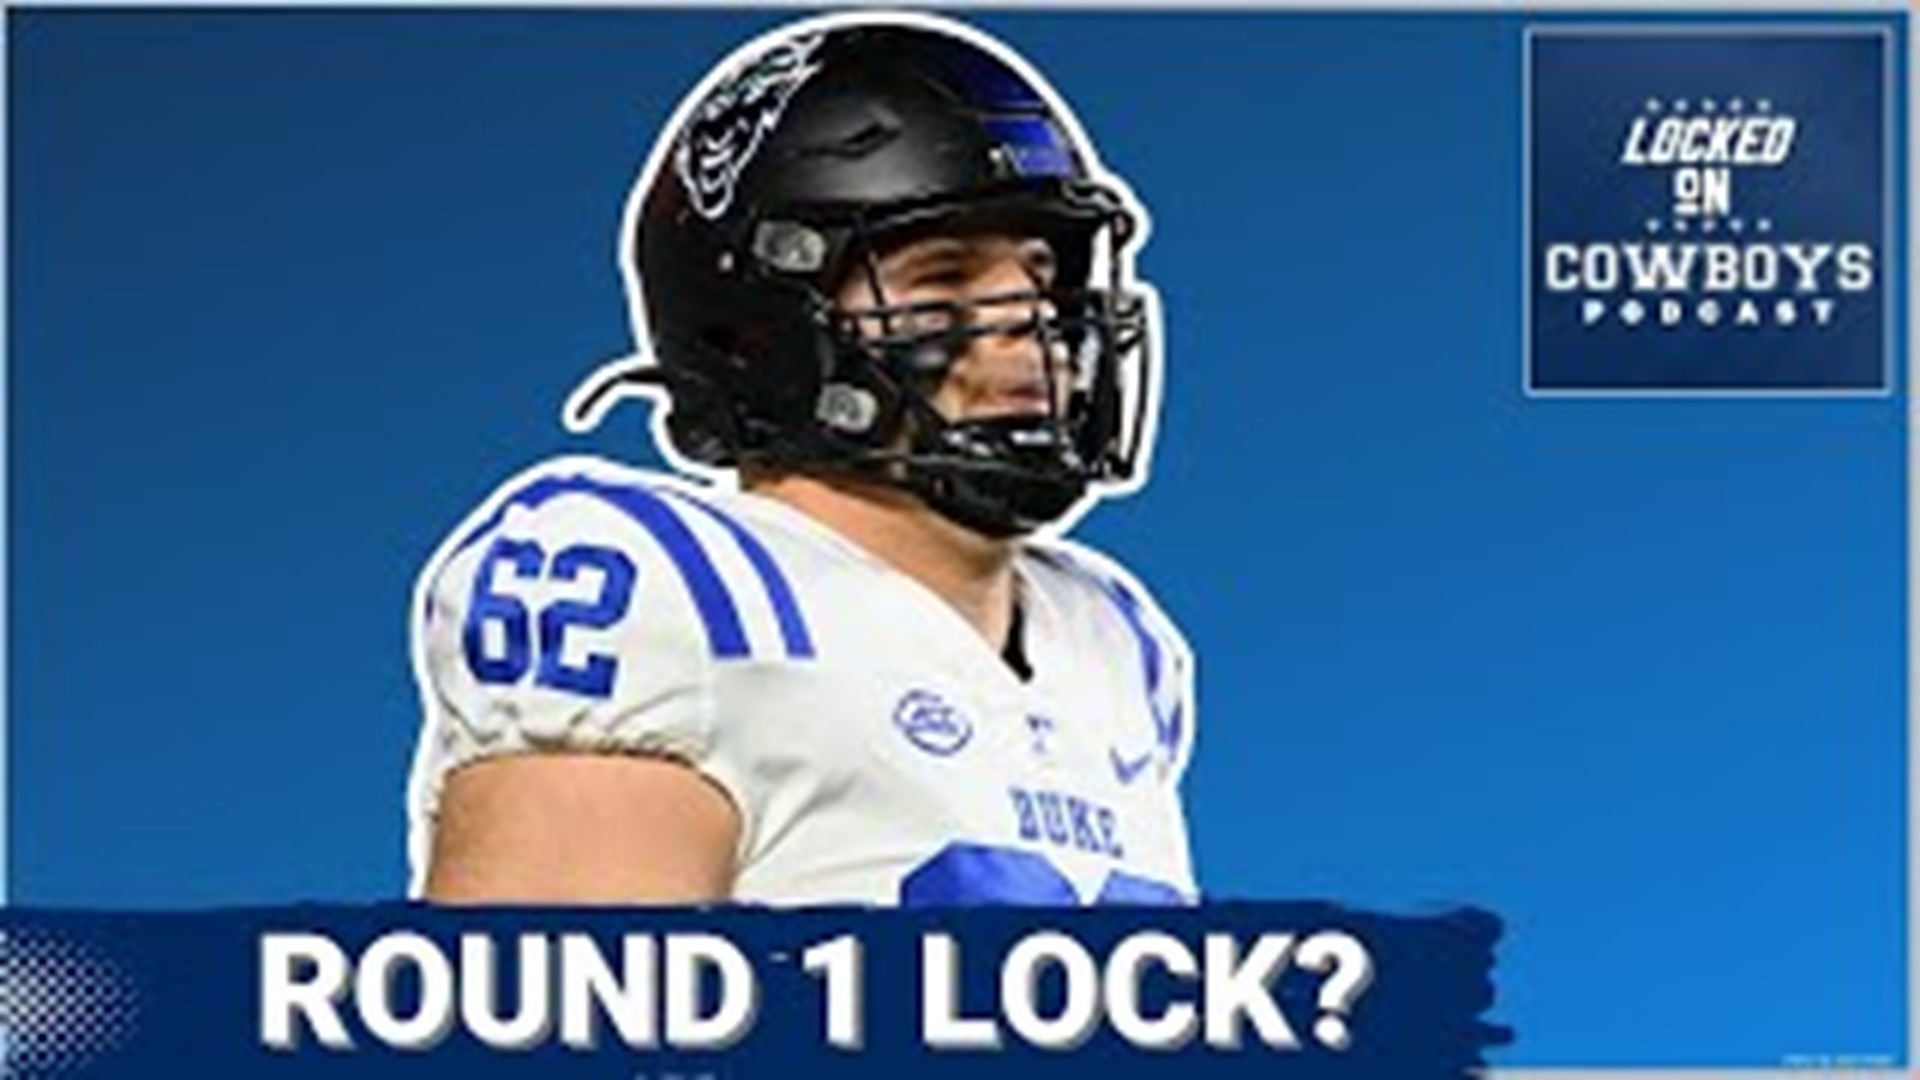 Do the Dallas Cowboys have to draft an offensive lineman in Round 1? Or can they still take the best player available on the board?